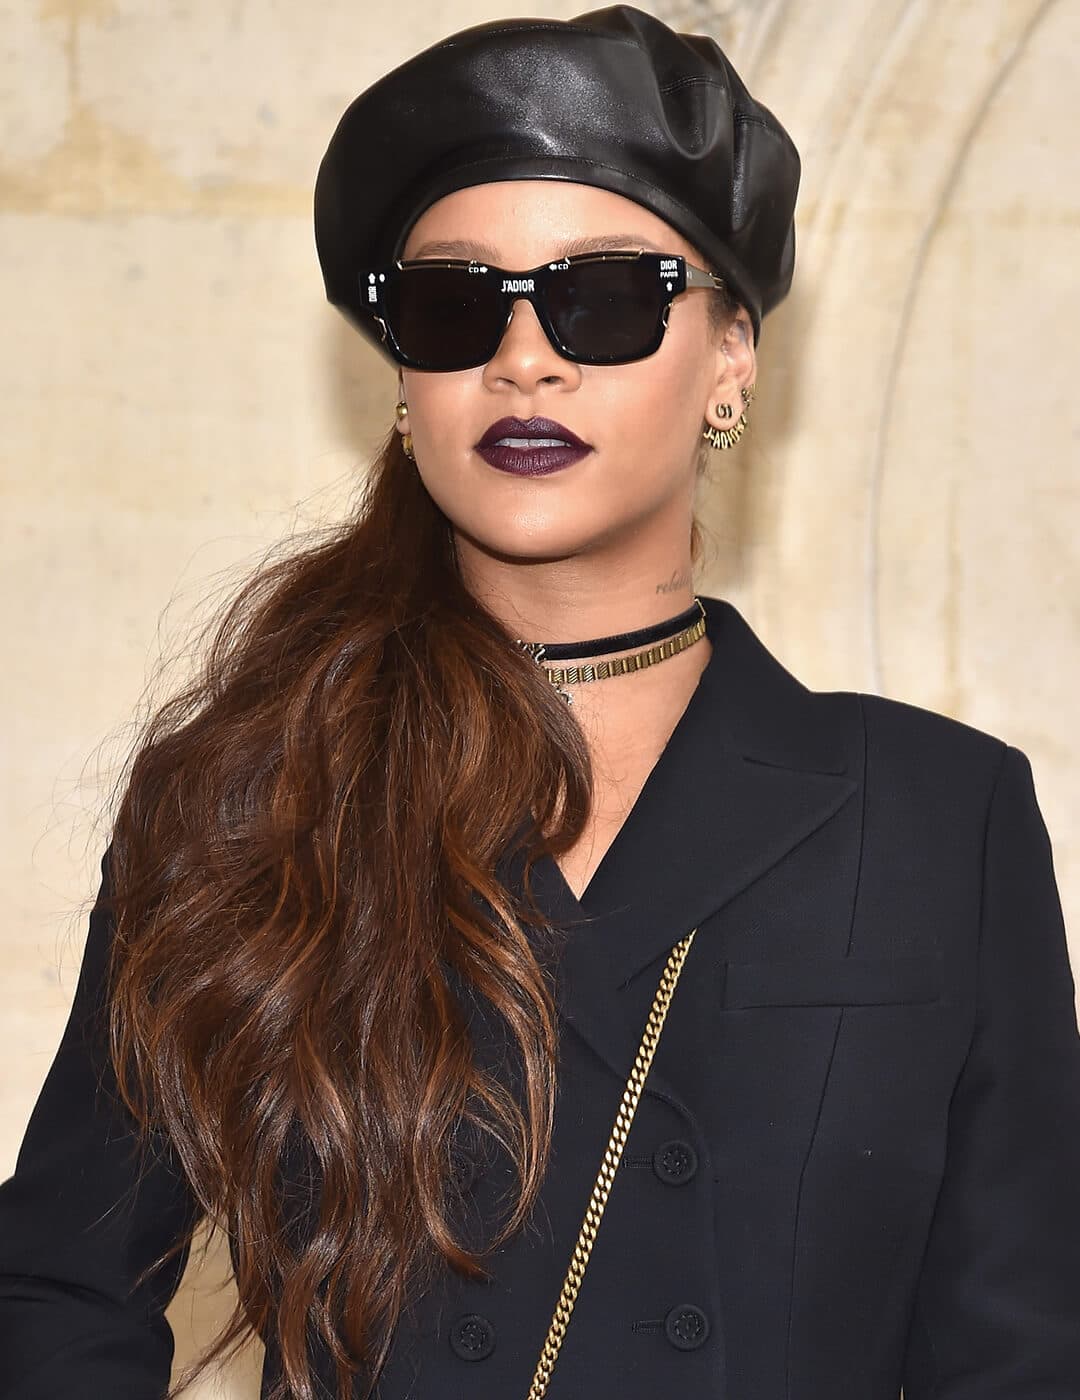 Rihanna in an all-black ensemble with a side ponytail hairstyle